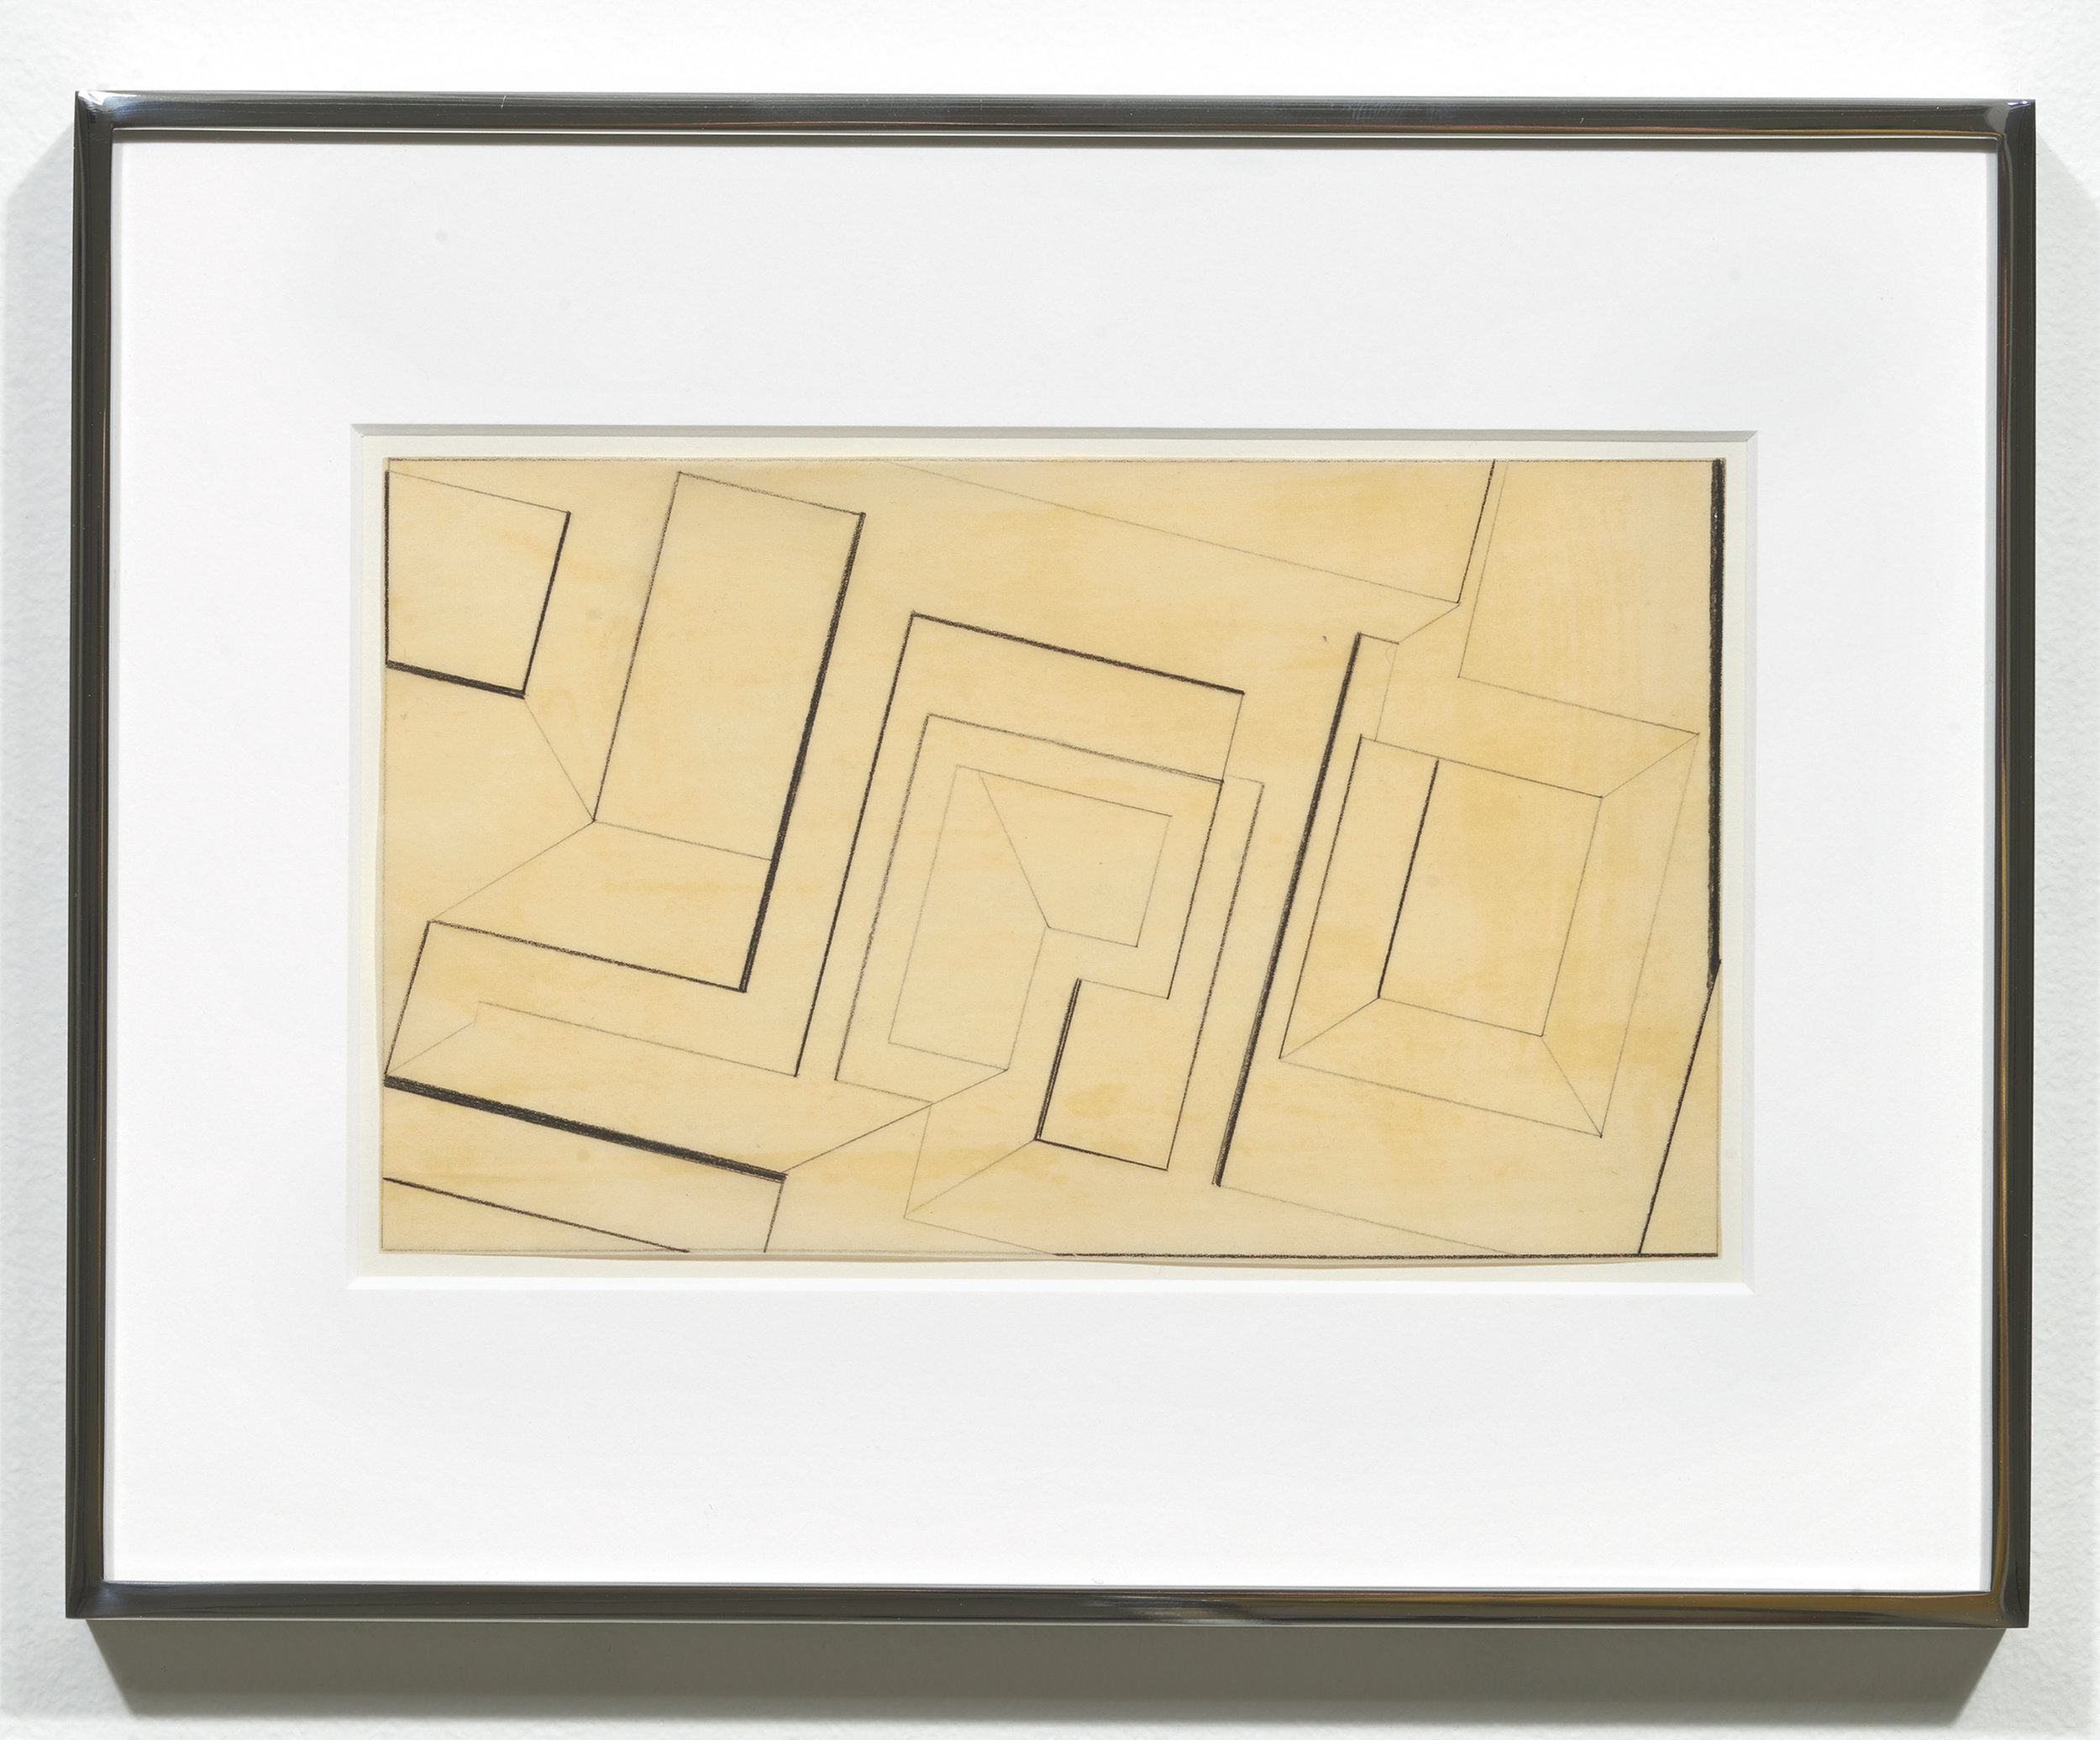  Suzanne Blank Redstone,  Drawing for Portal-Descent #2 , 1967, Paper, tracing paper, pencil, Framed dimensions: 8.75 x 11.25 inches 